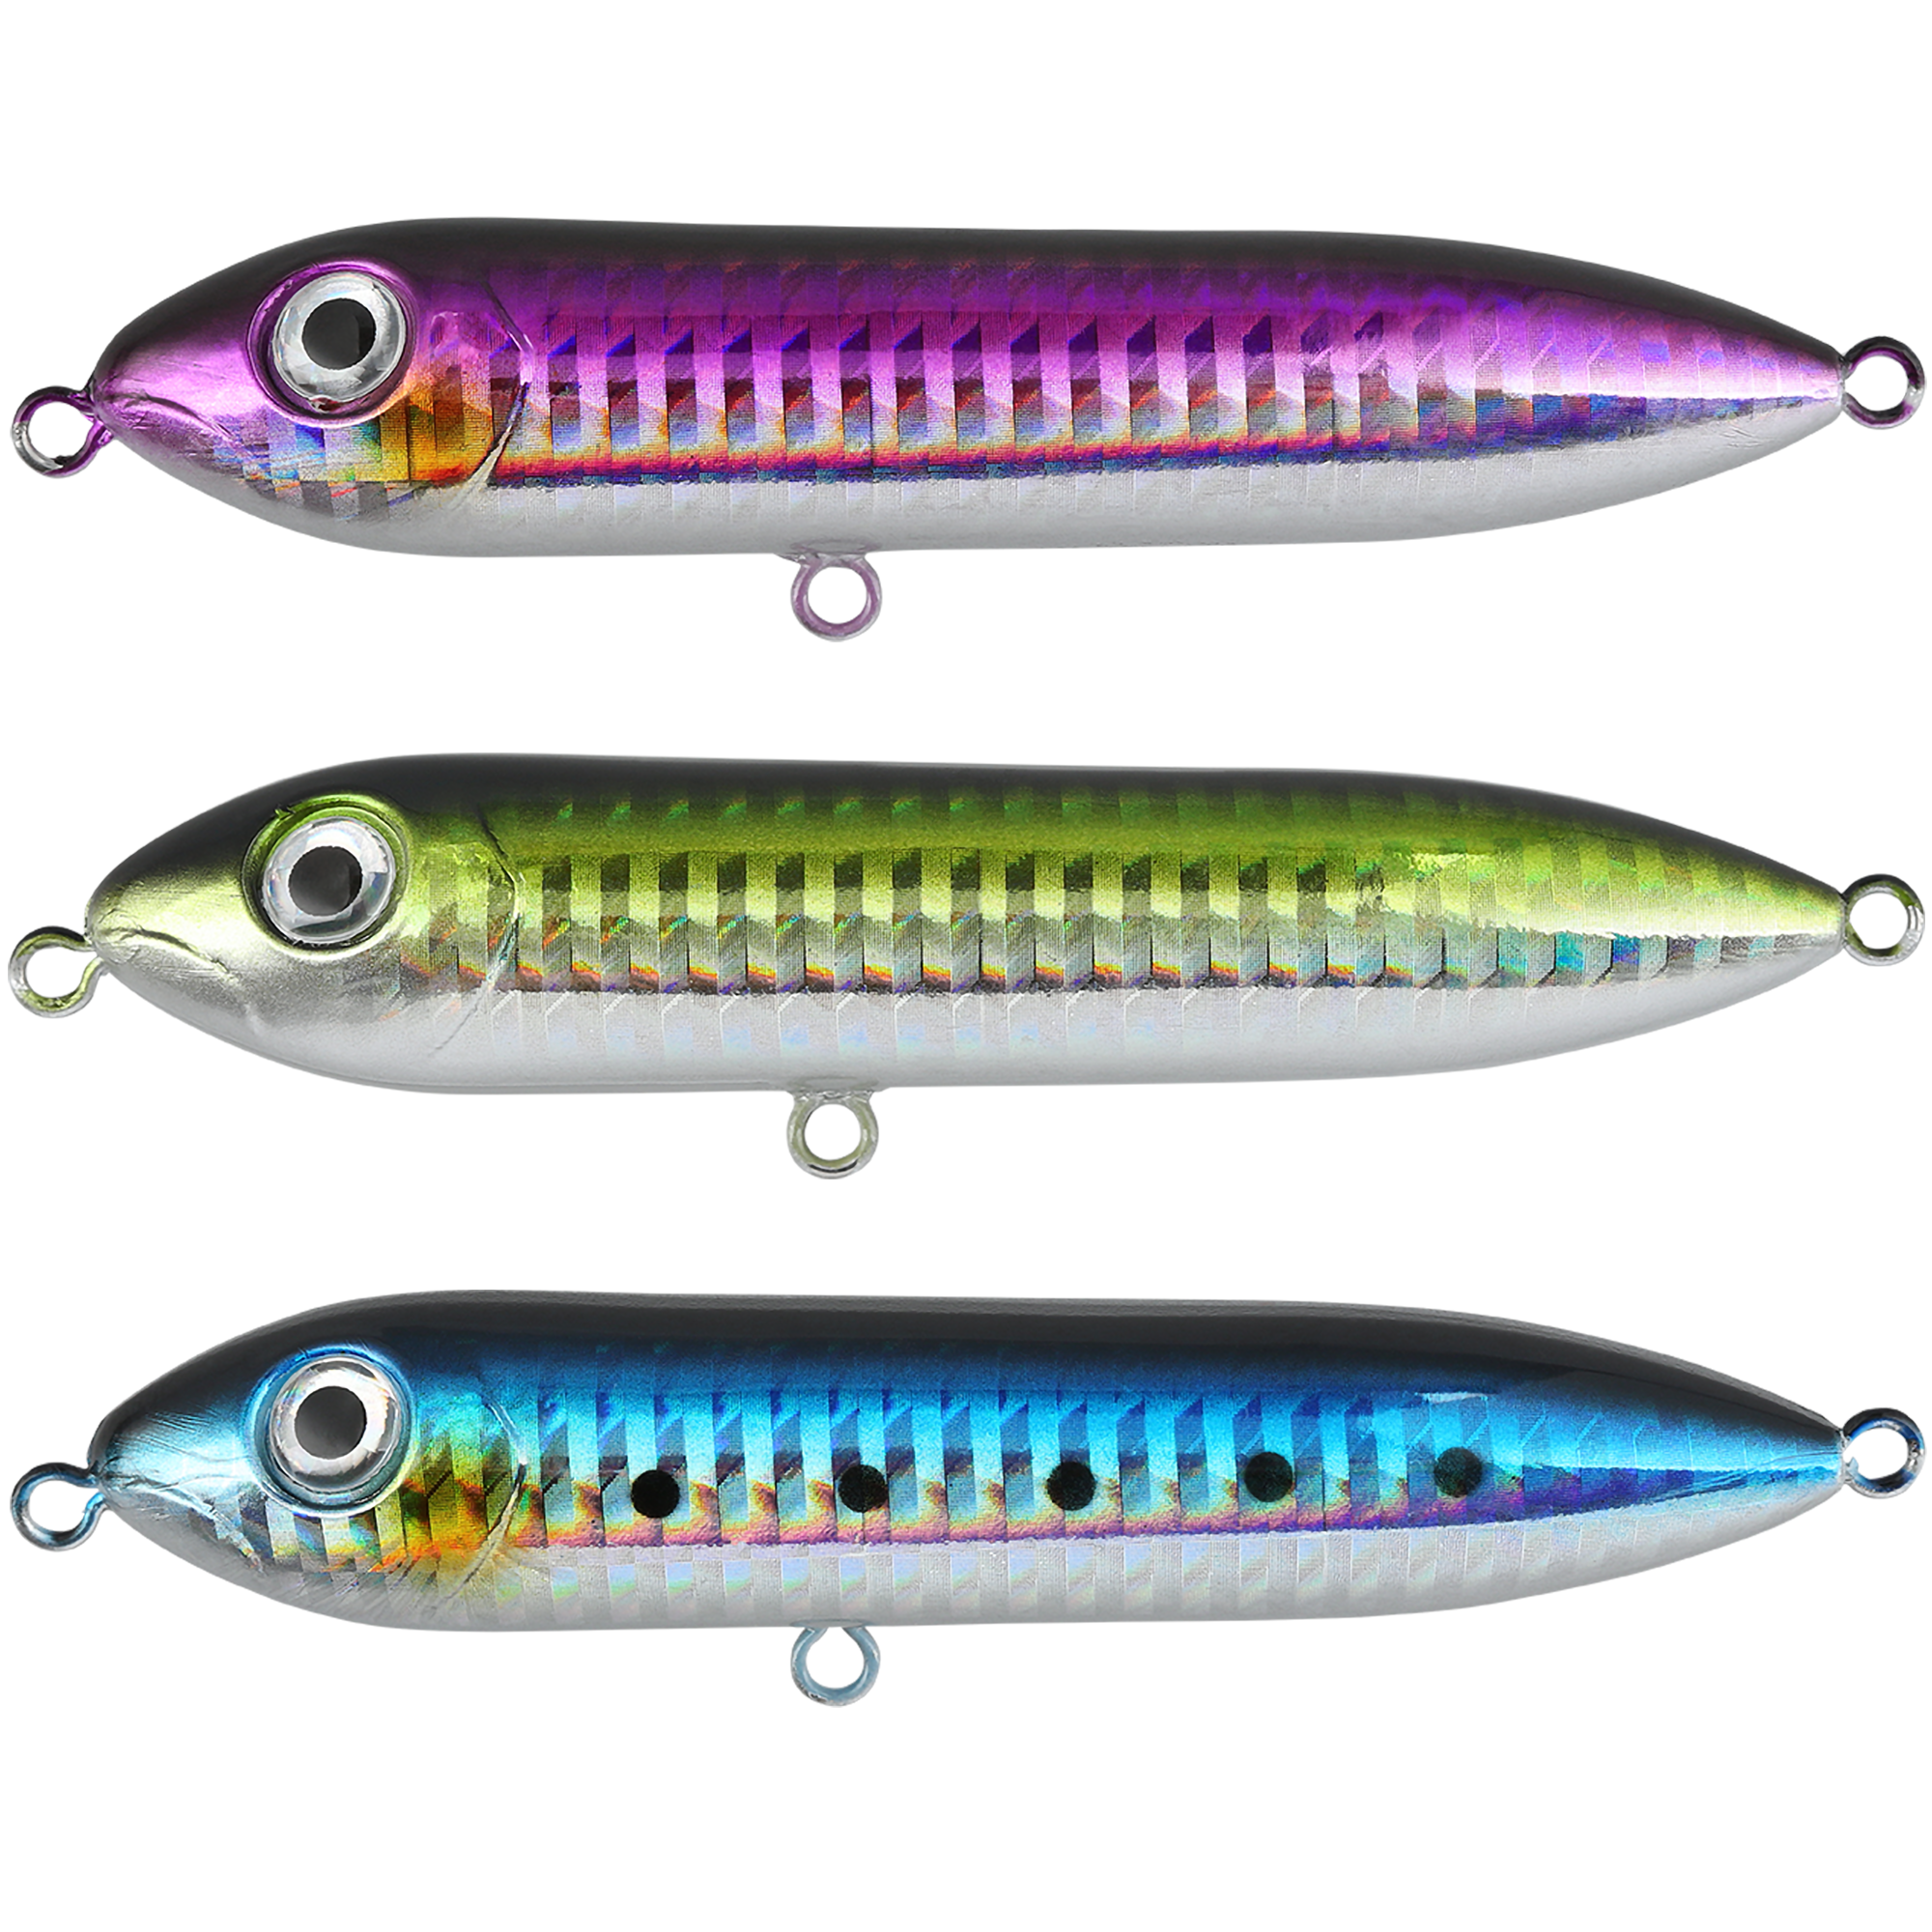 Bait Stalkers: Stinger Flies to Catch Extra Catfish, 5-Pack - Flashing Shad